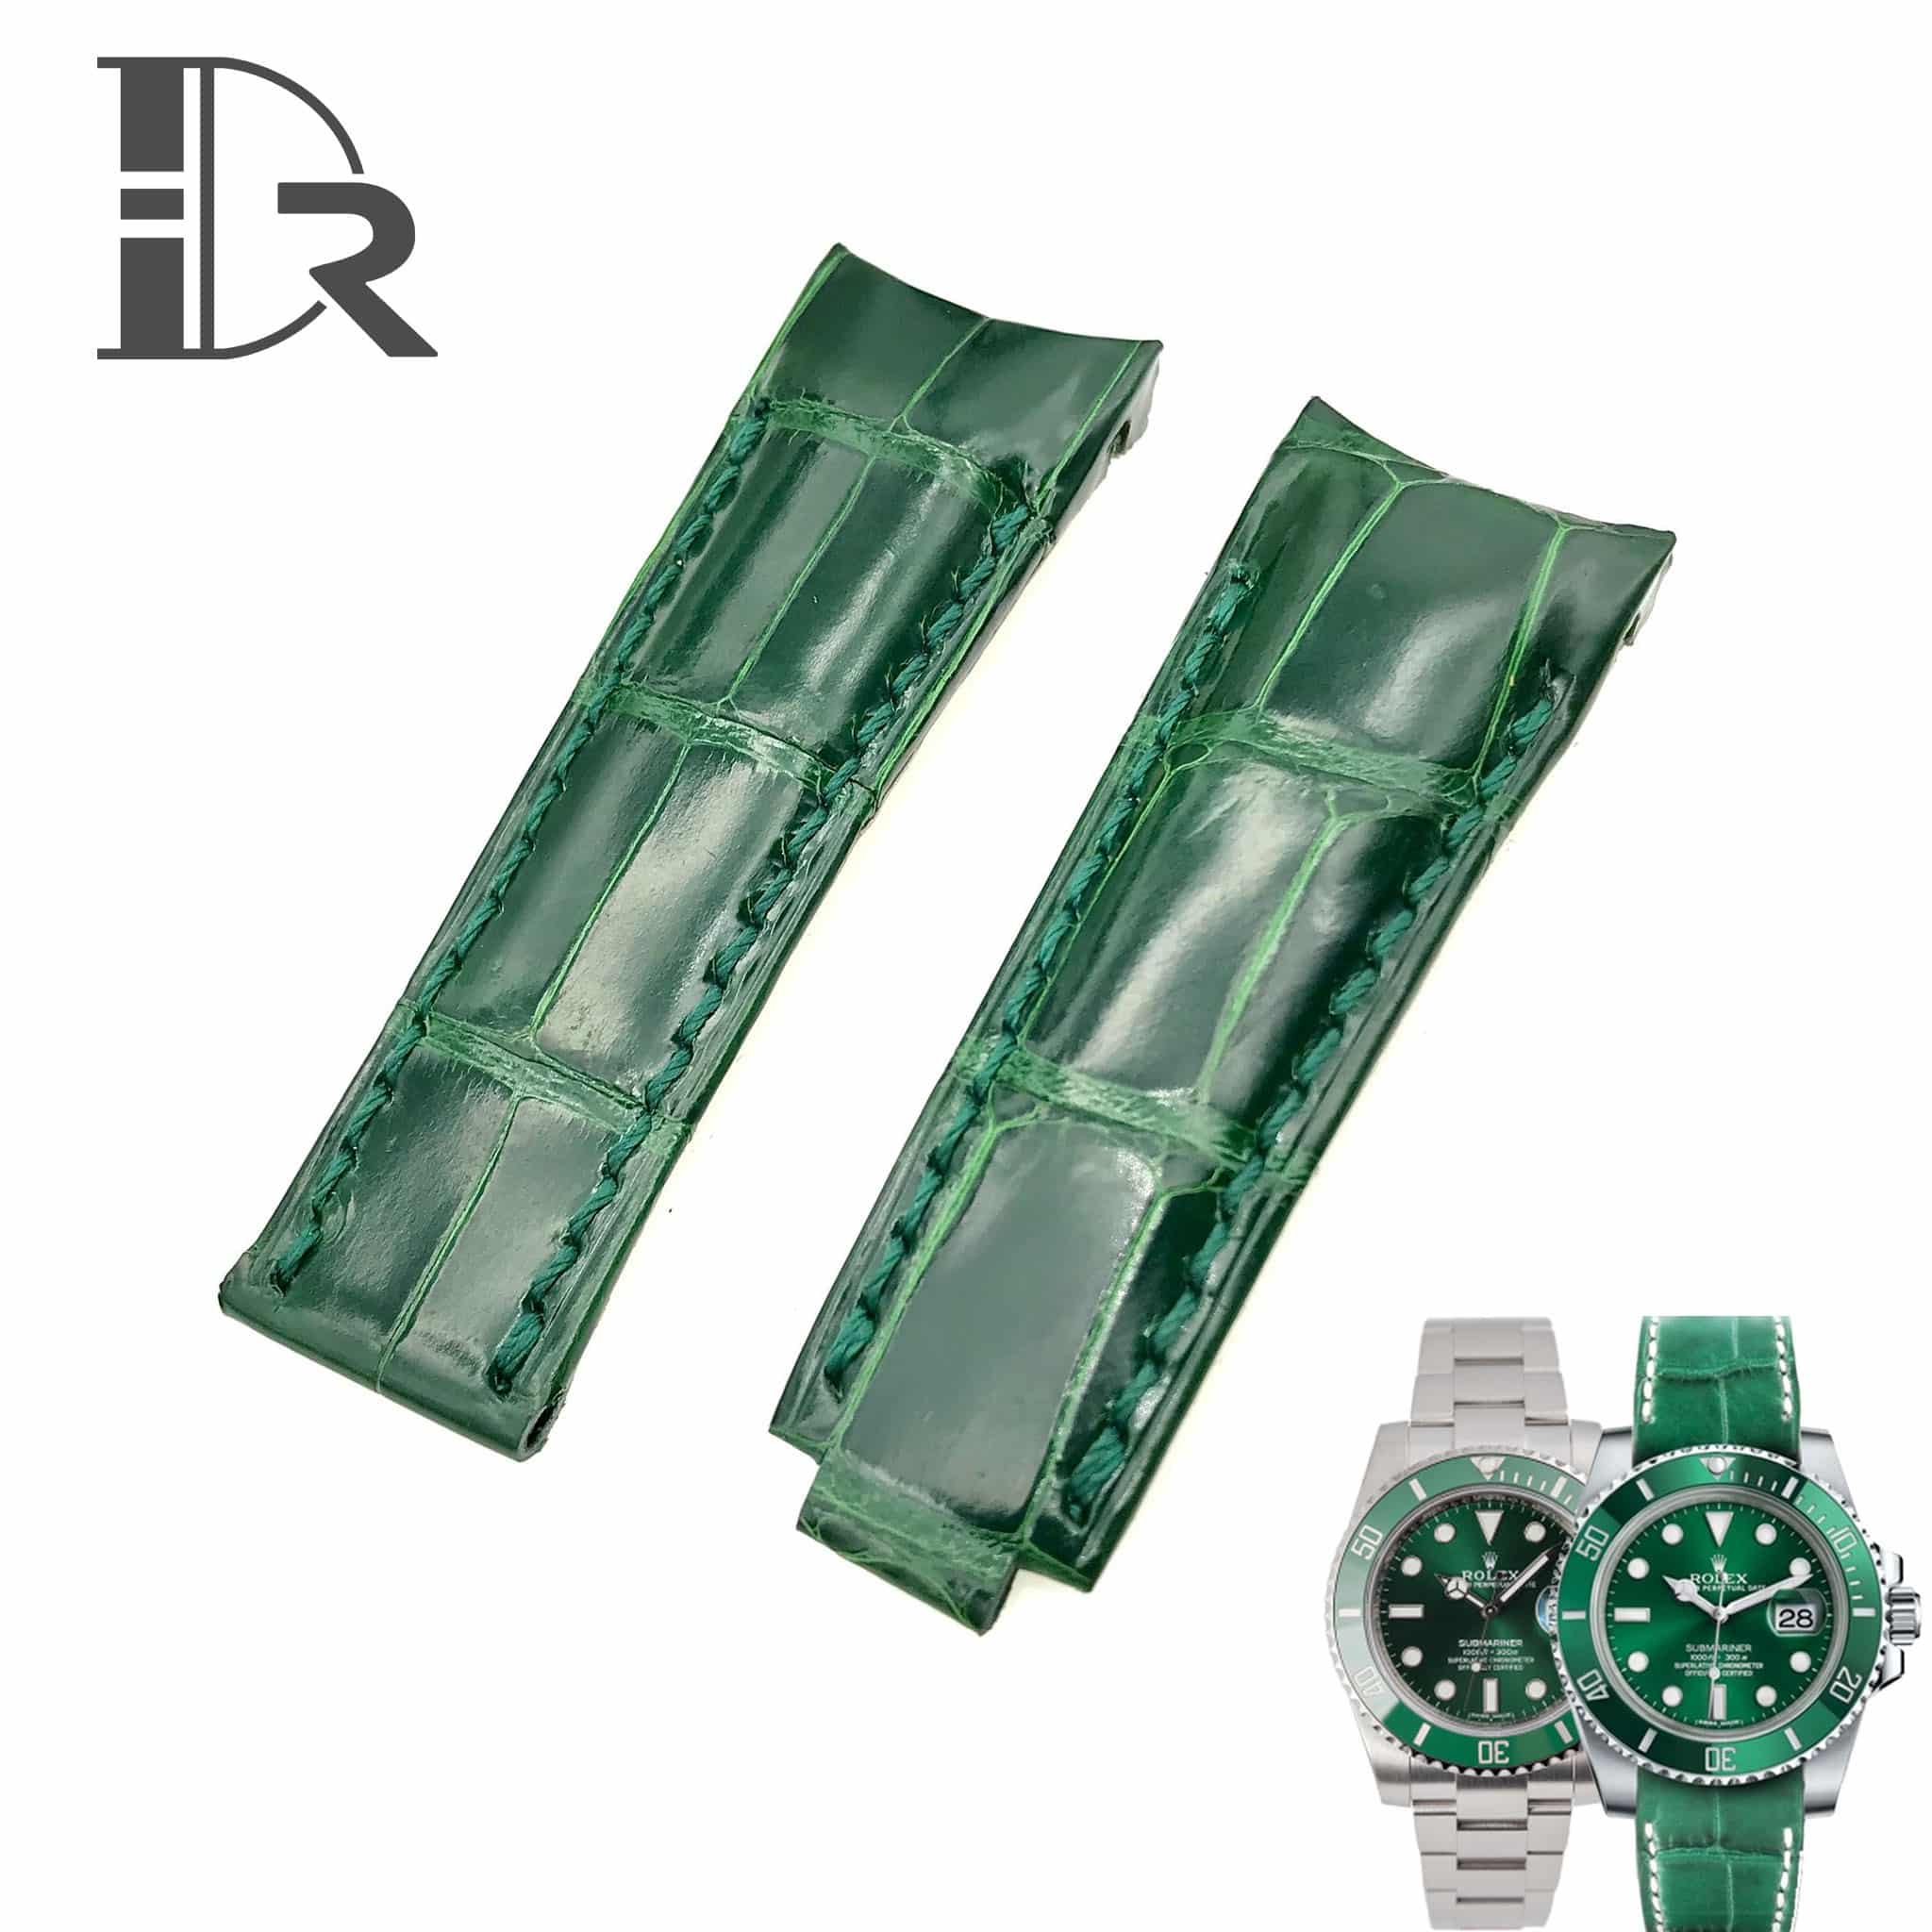 Best quality genuine American Alligator crocodile OEM Green handmade Belly-scale replacement Rolex watch strap and watch band for Rolex submariner luxury watches - Shop the aftermarket High-end(HE) quality straps online